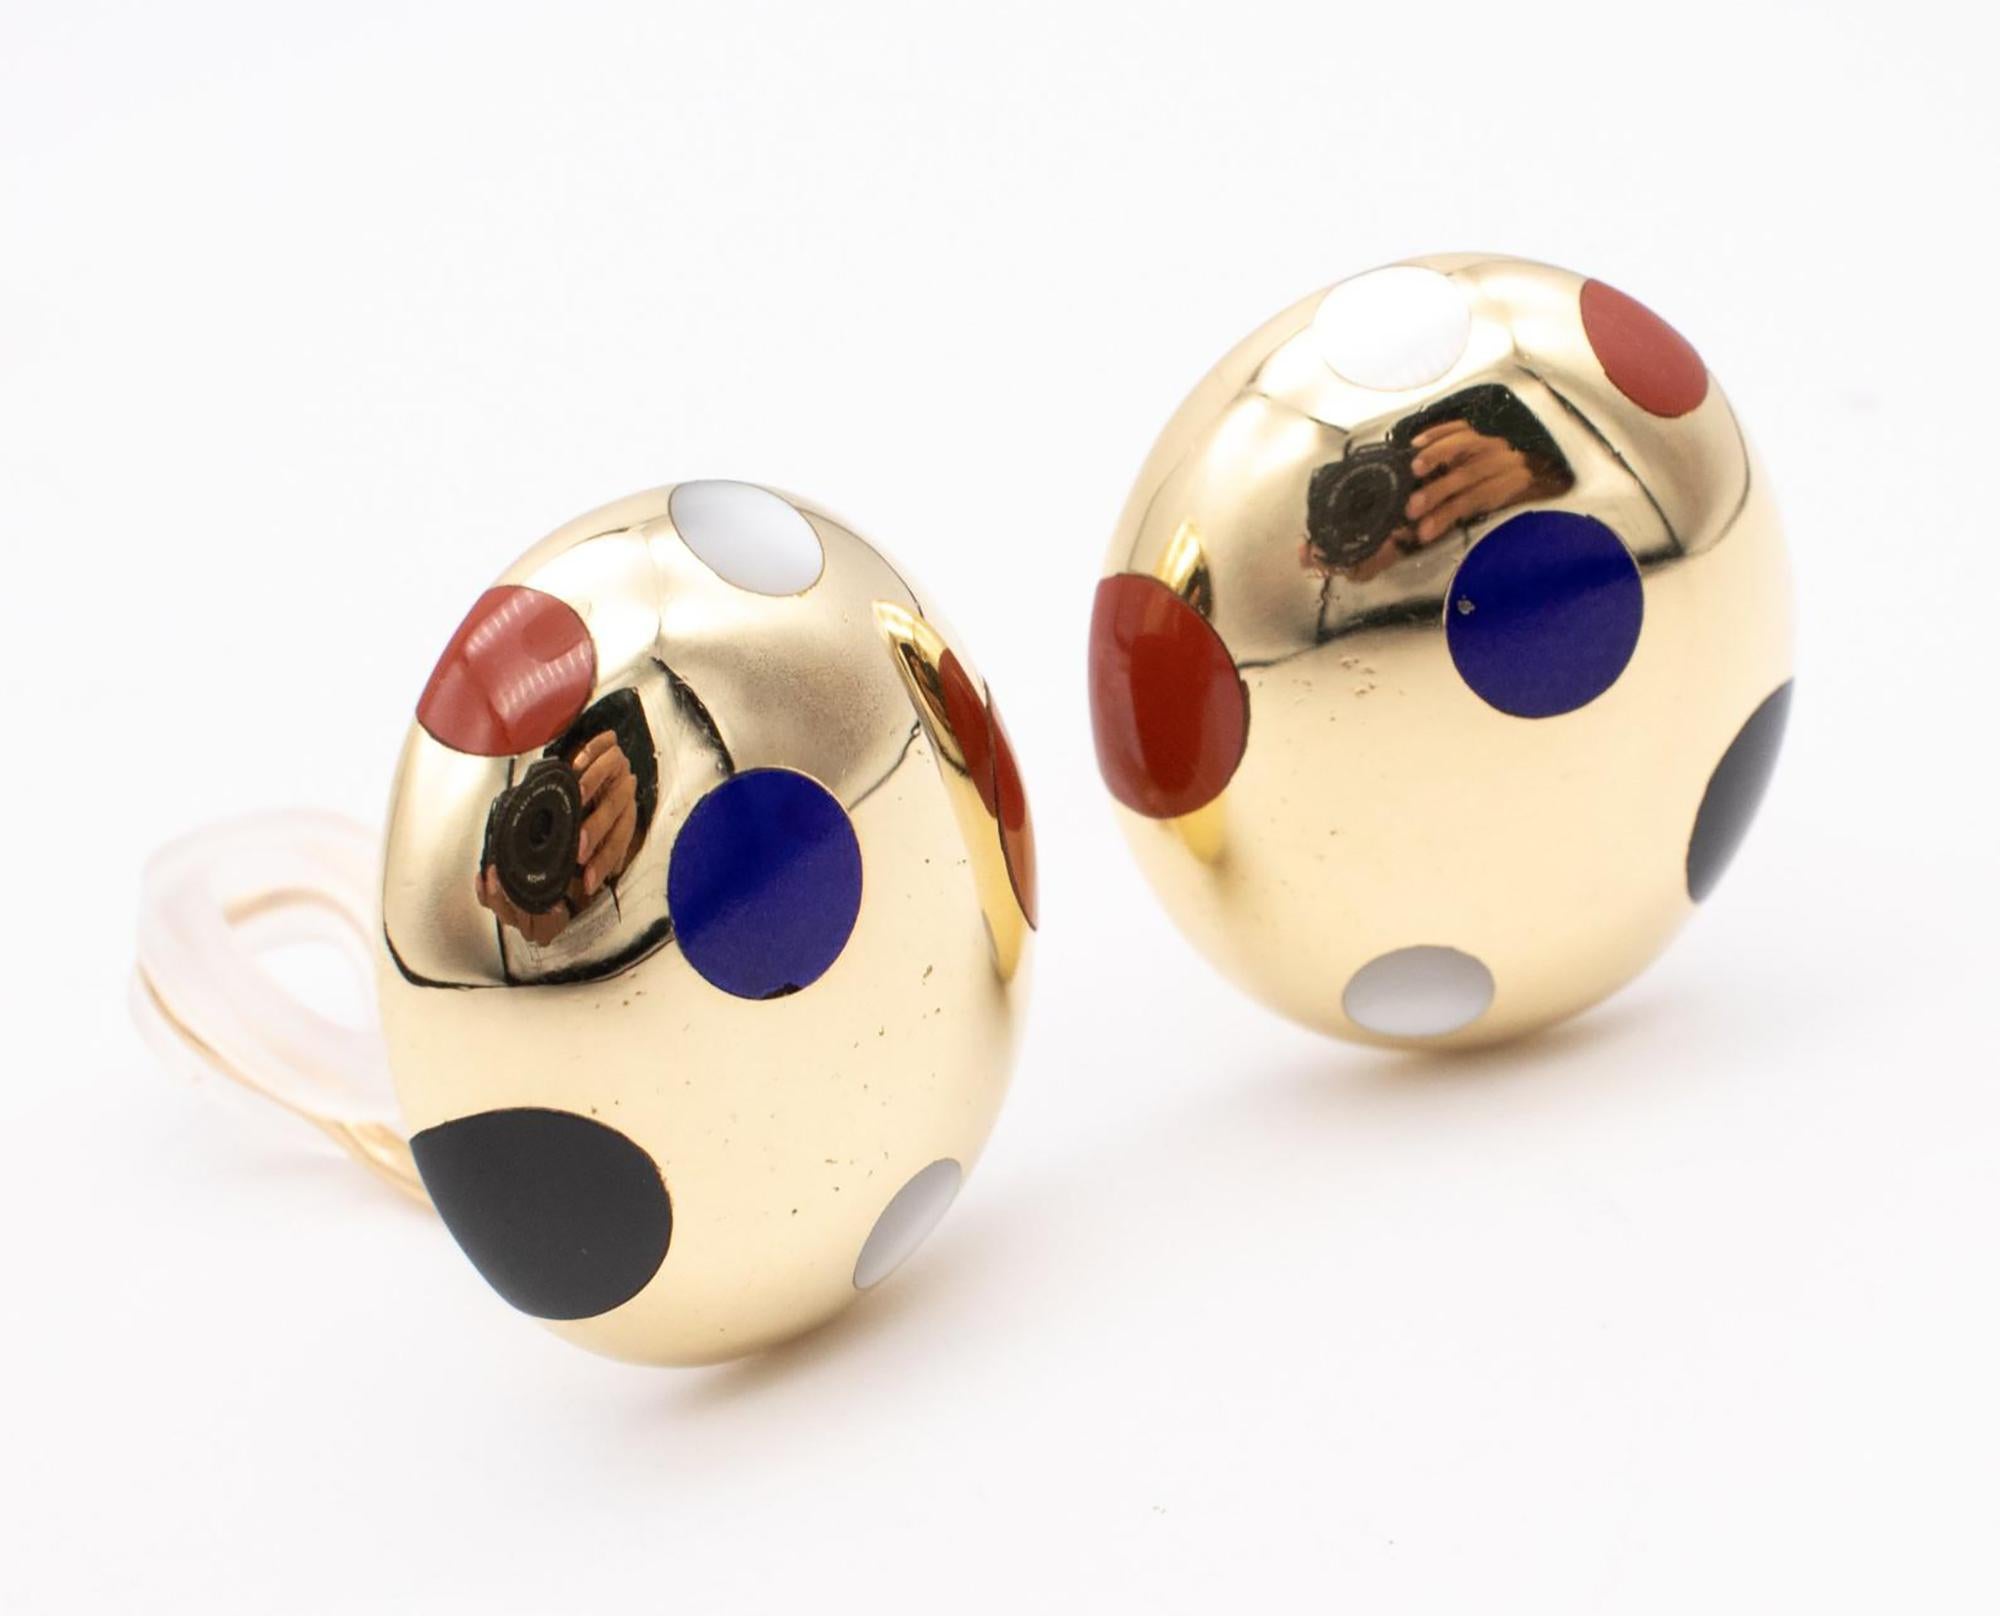 18K gold earrings accented with hard stone inlay by Angela Cummings. Set with polka dots of Carnelian, Mother of Pearl and Onyx. Back is marked 